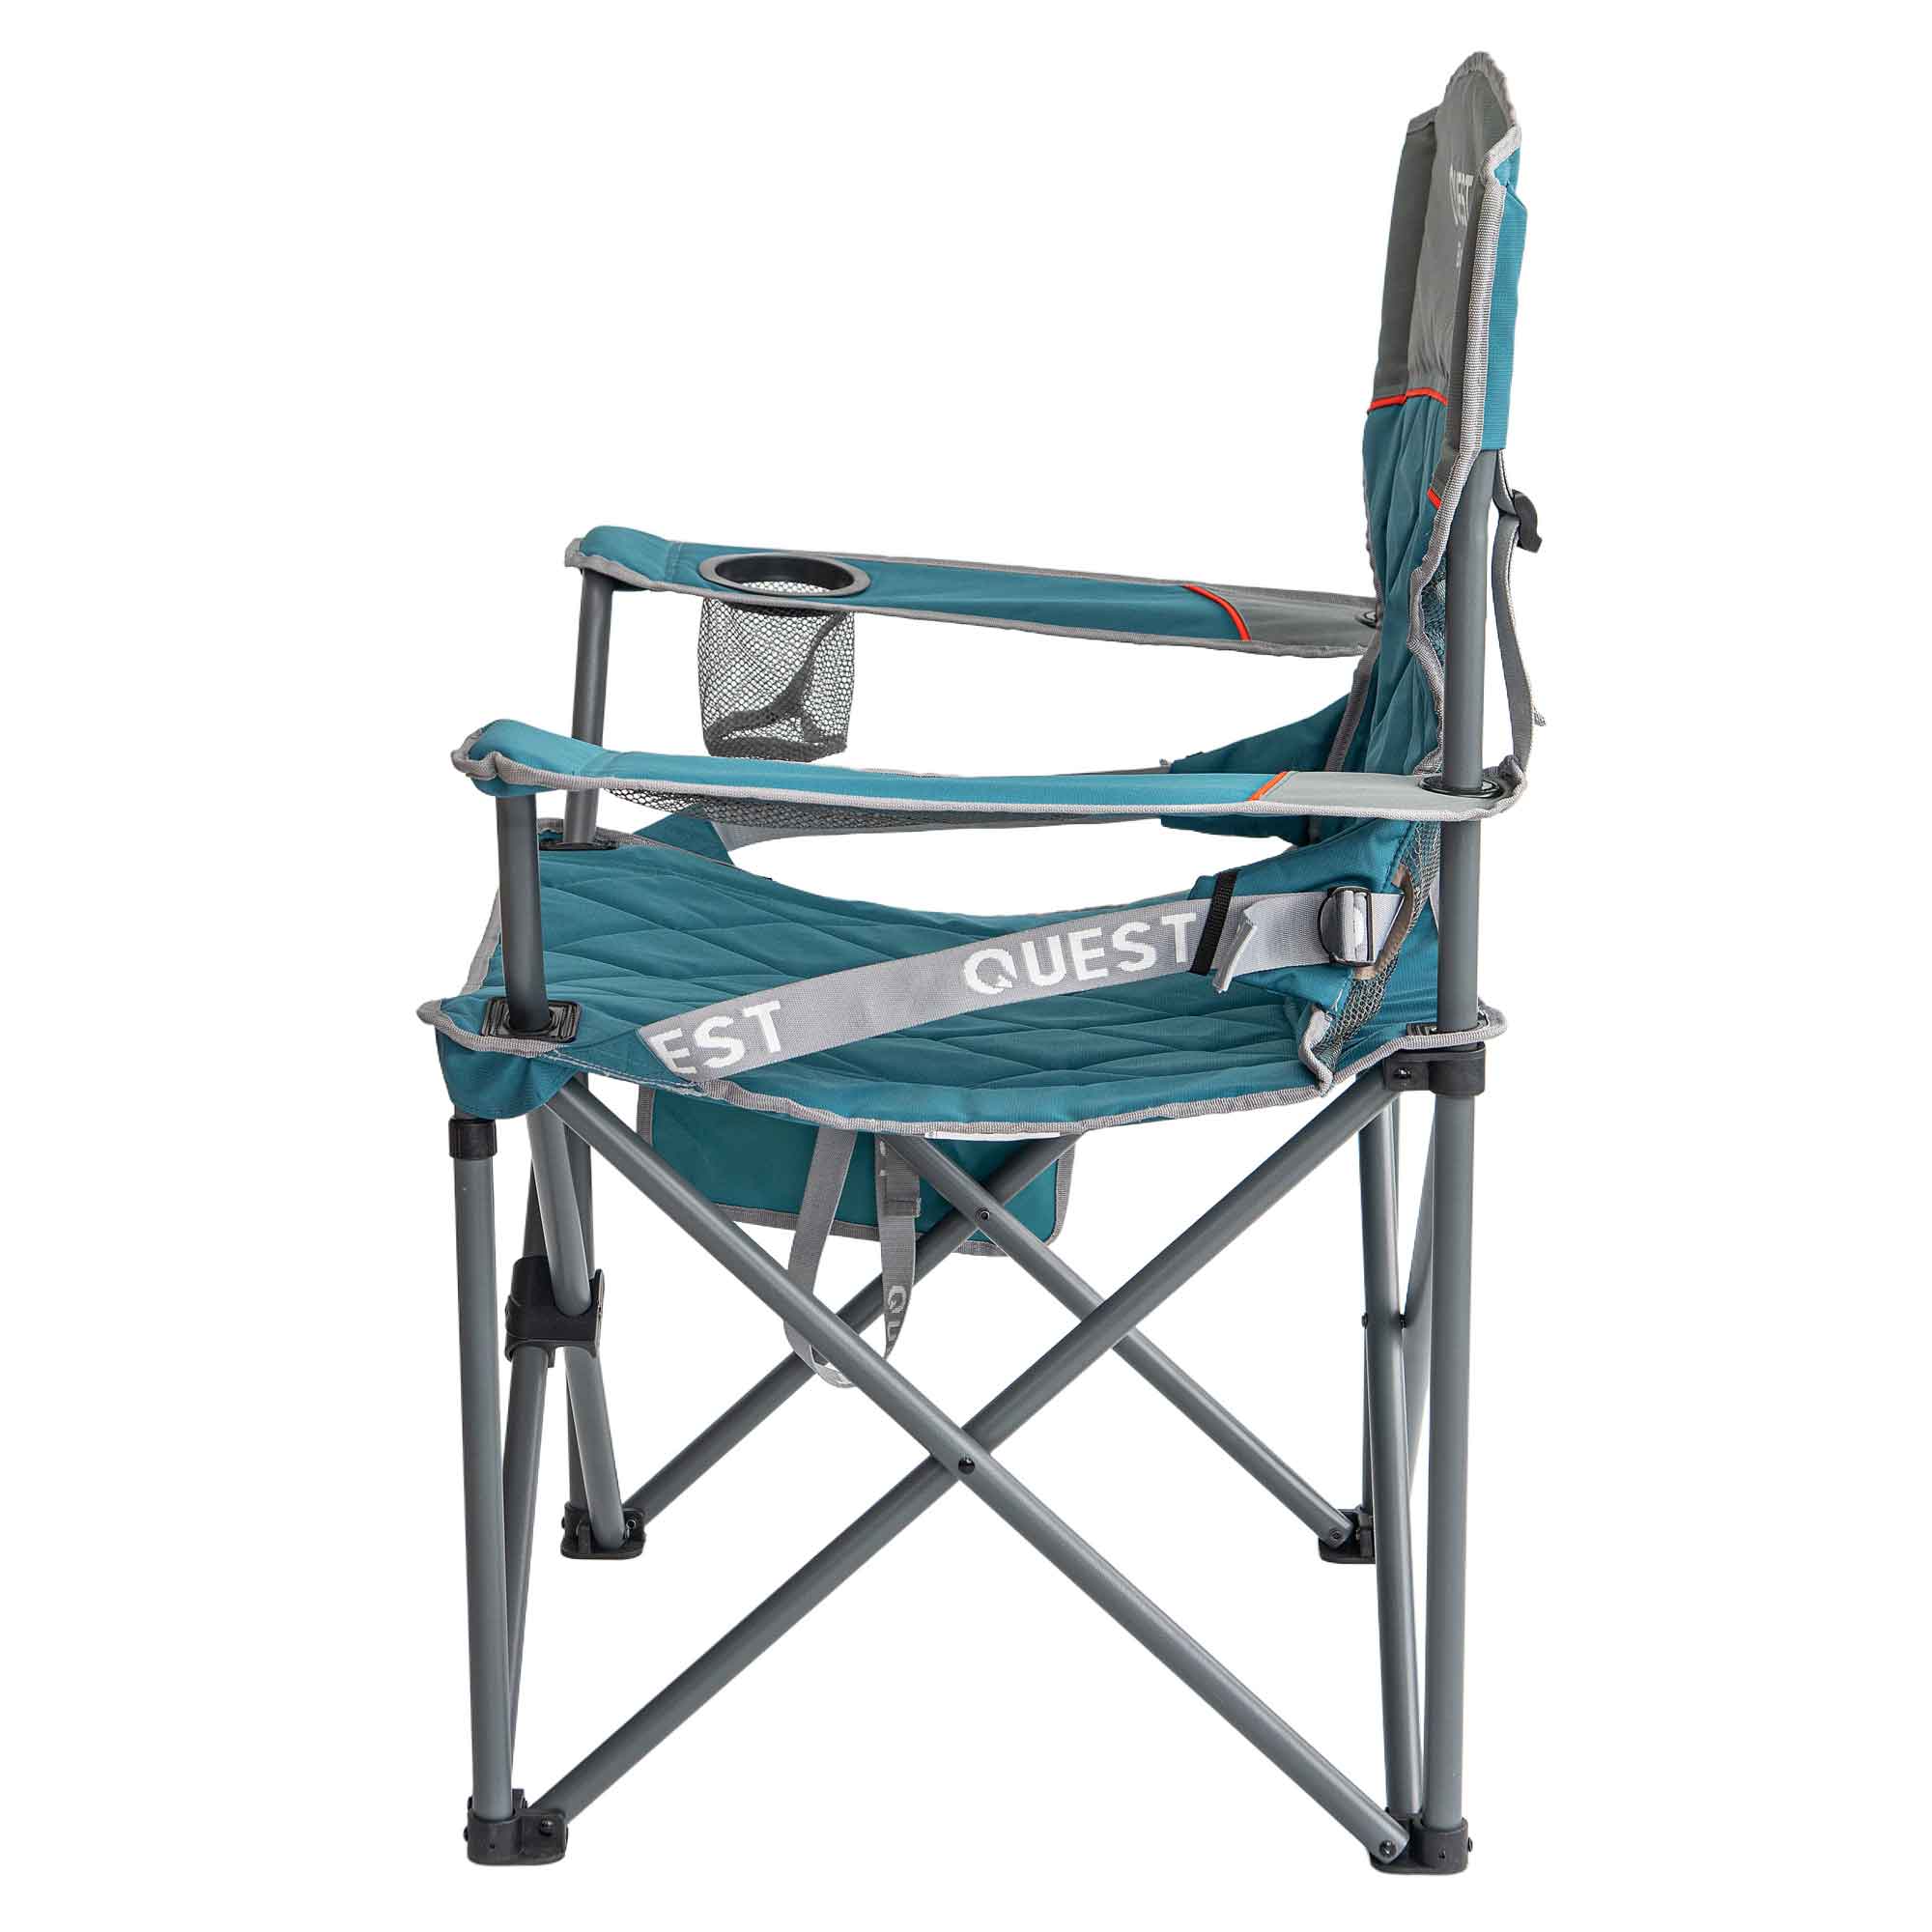 Quest Outdoors Big Easy Chair